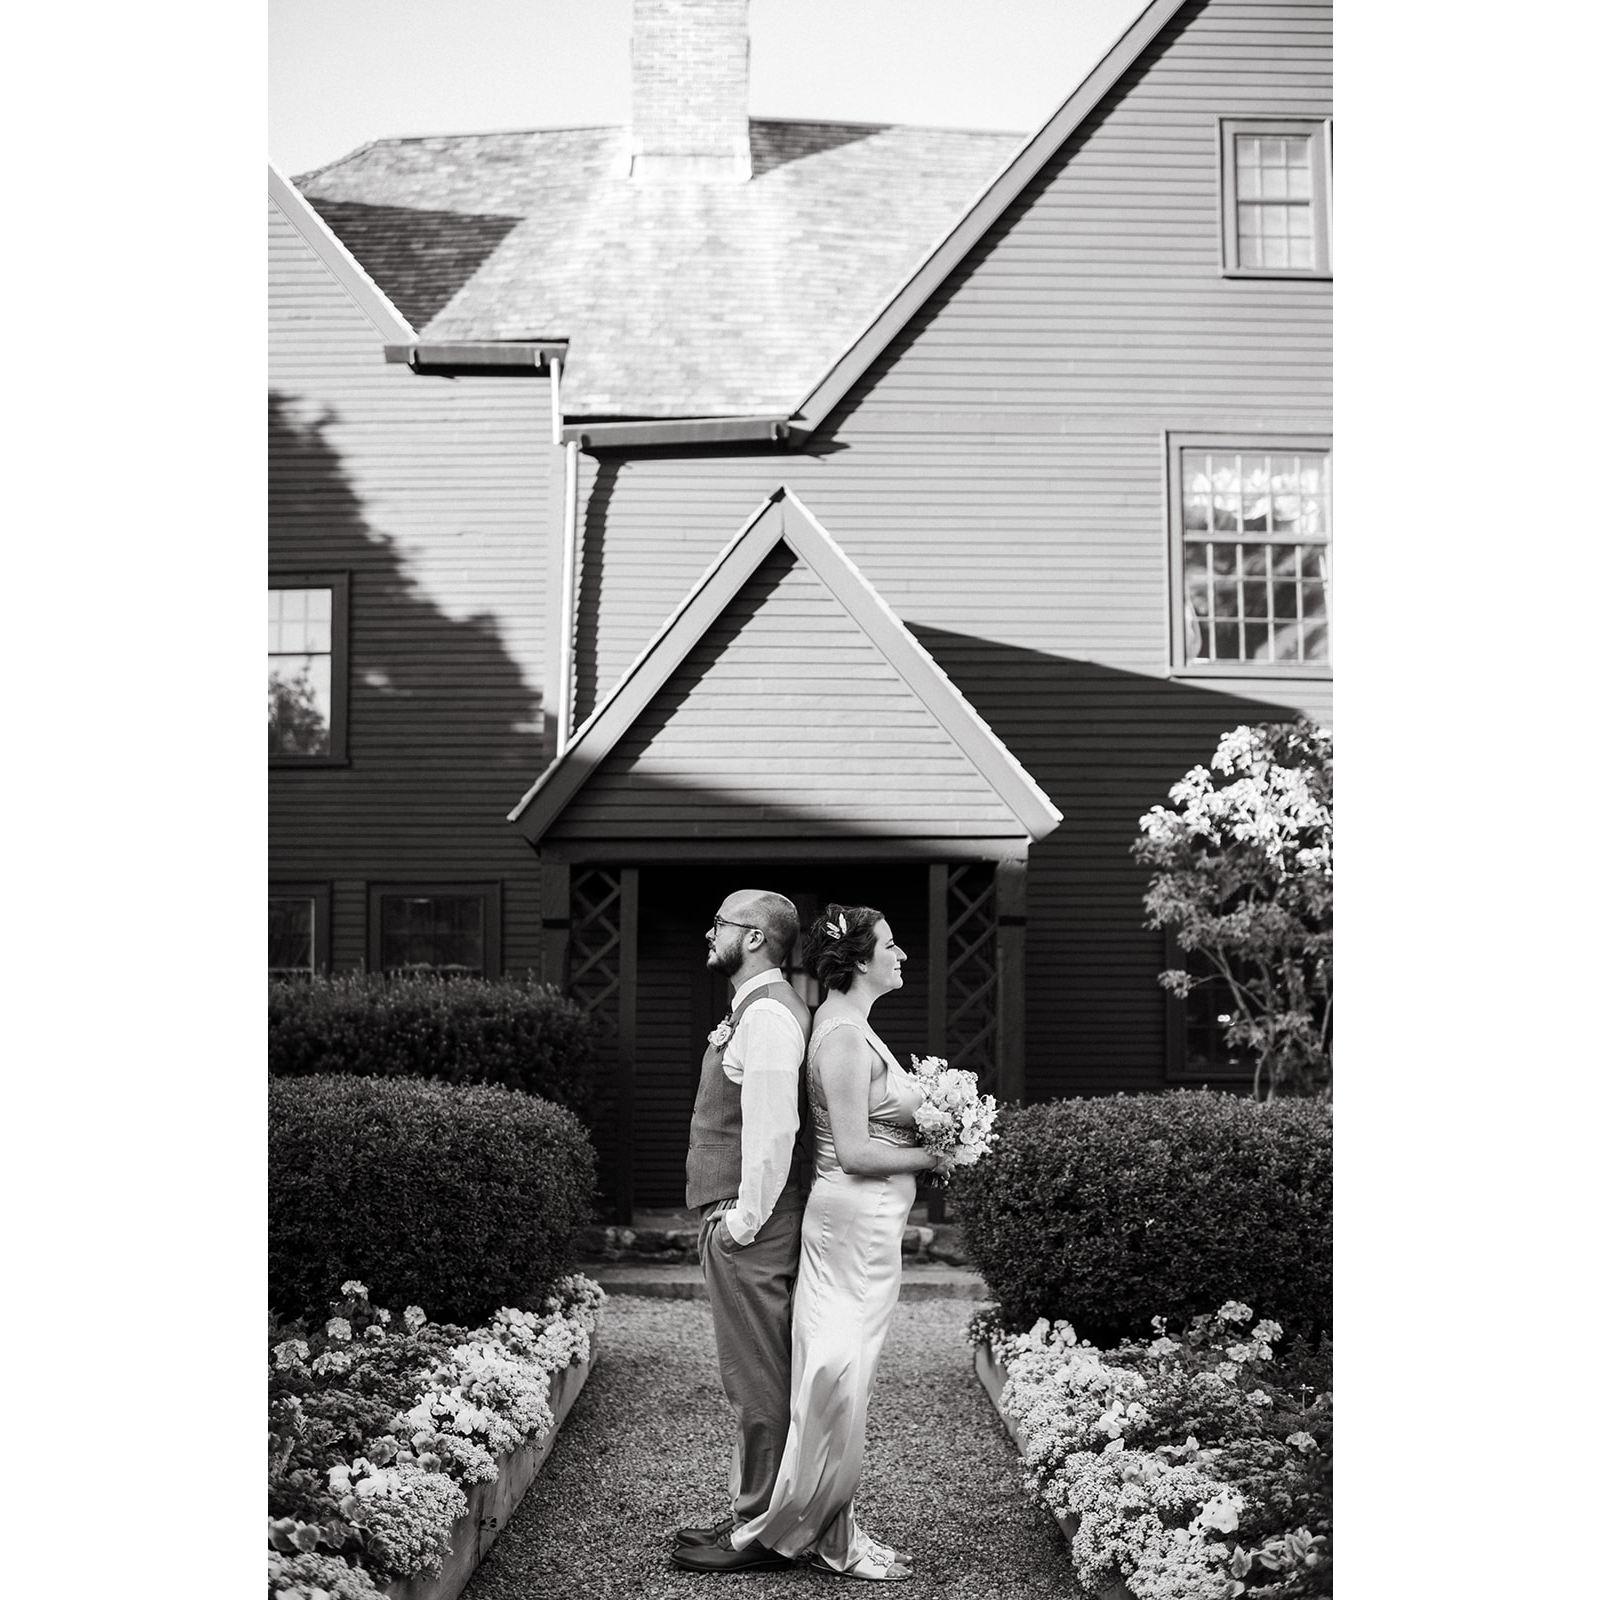 The House of the Seven Gables served as a gorgeous backdrop for our ceremony.